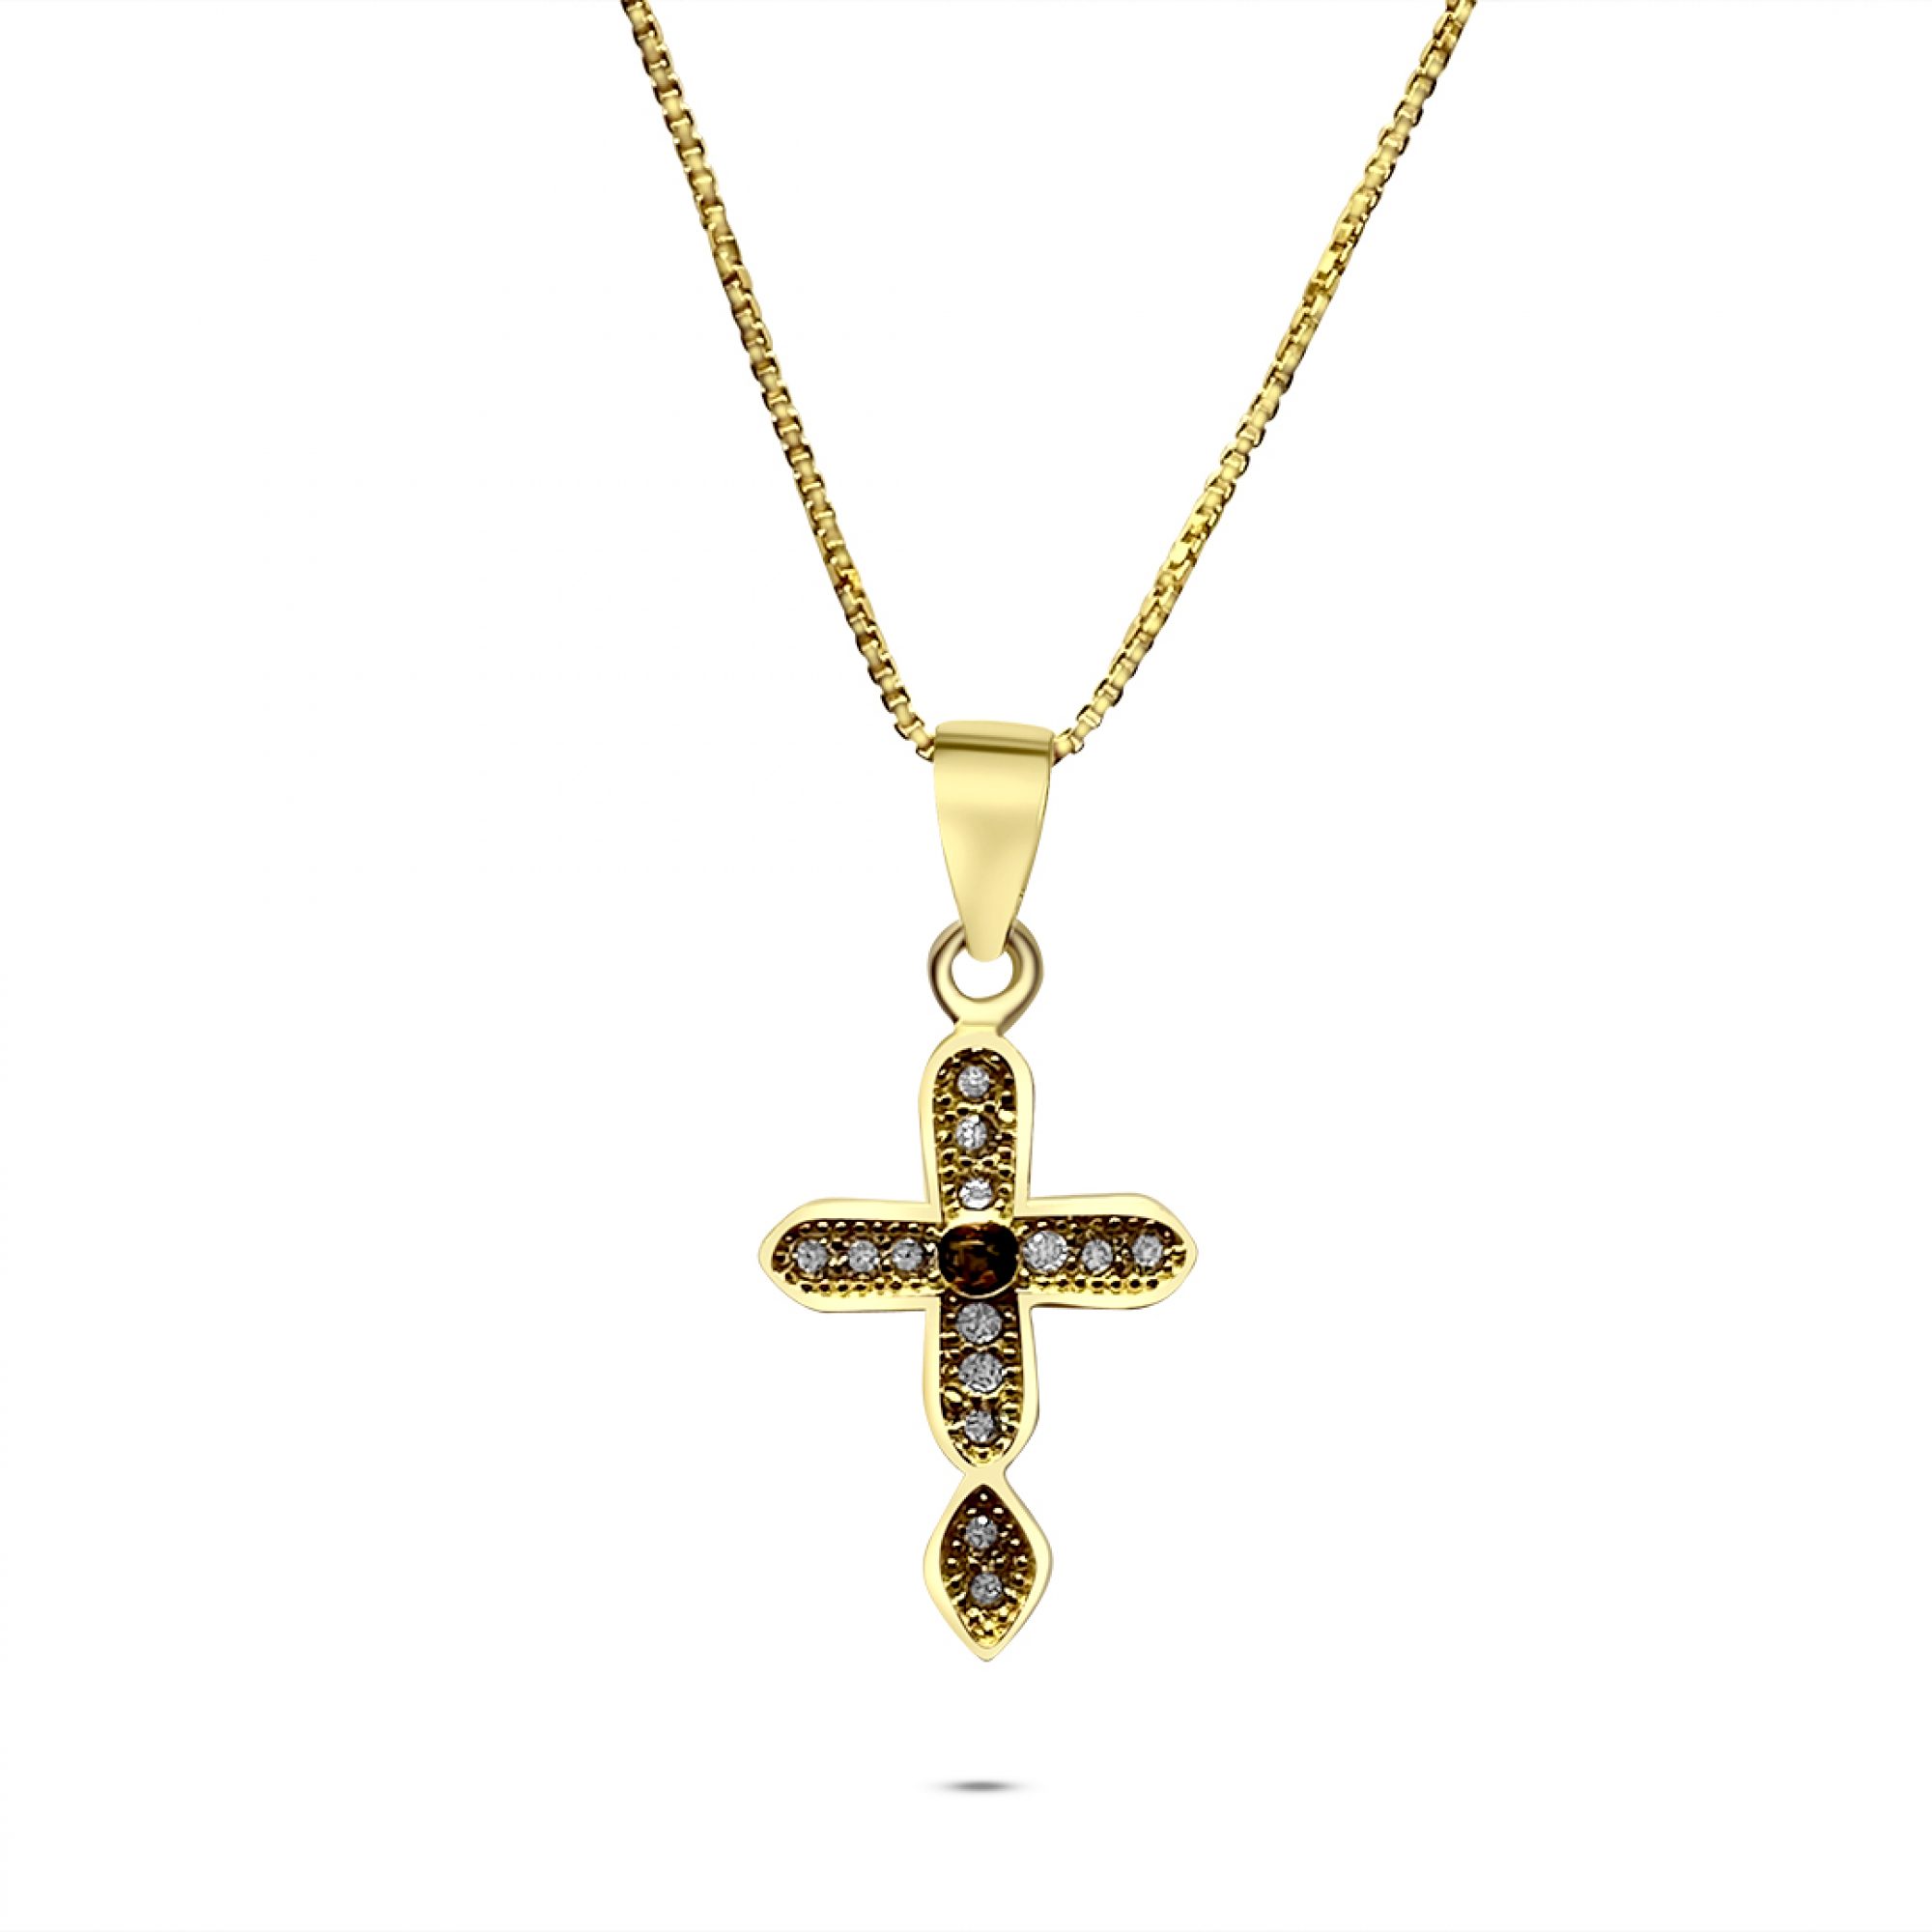 Gold plated cross necklace with zircon stones